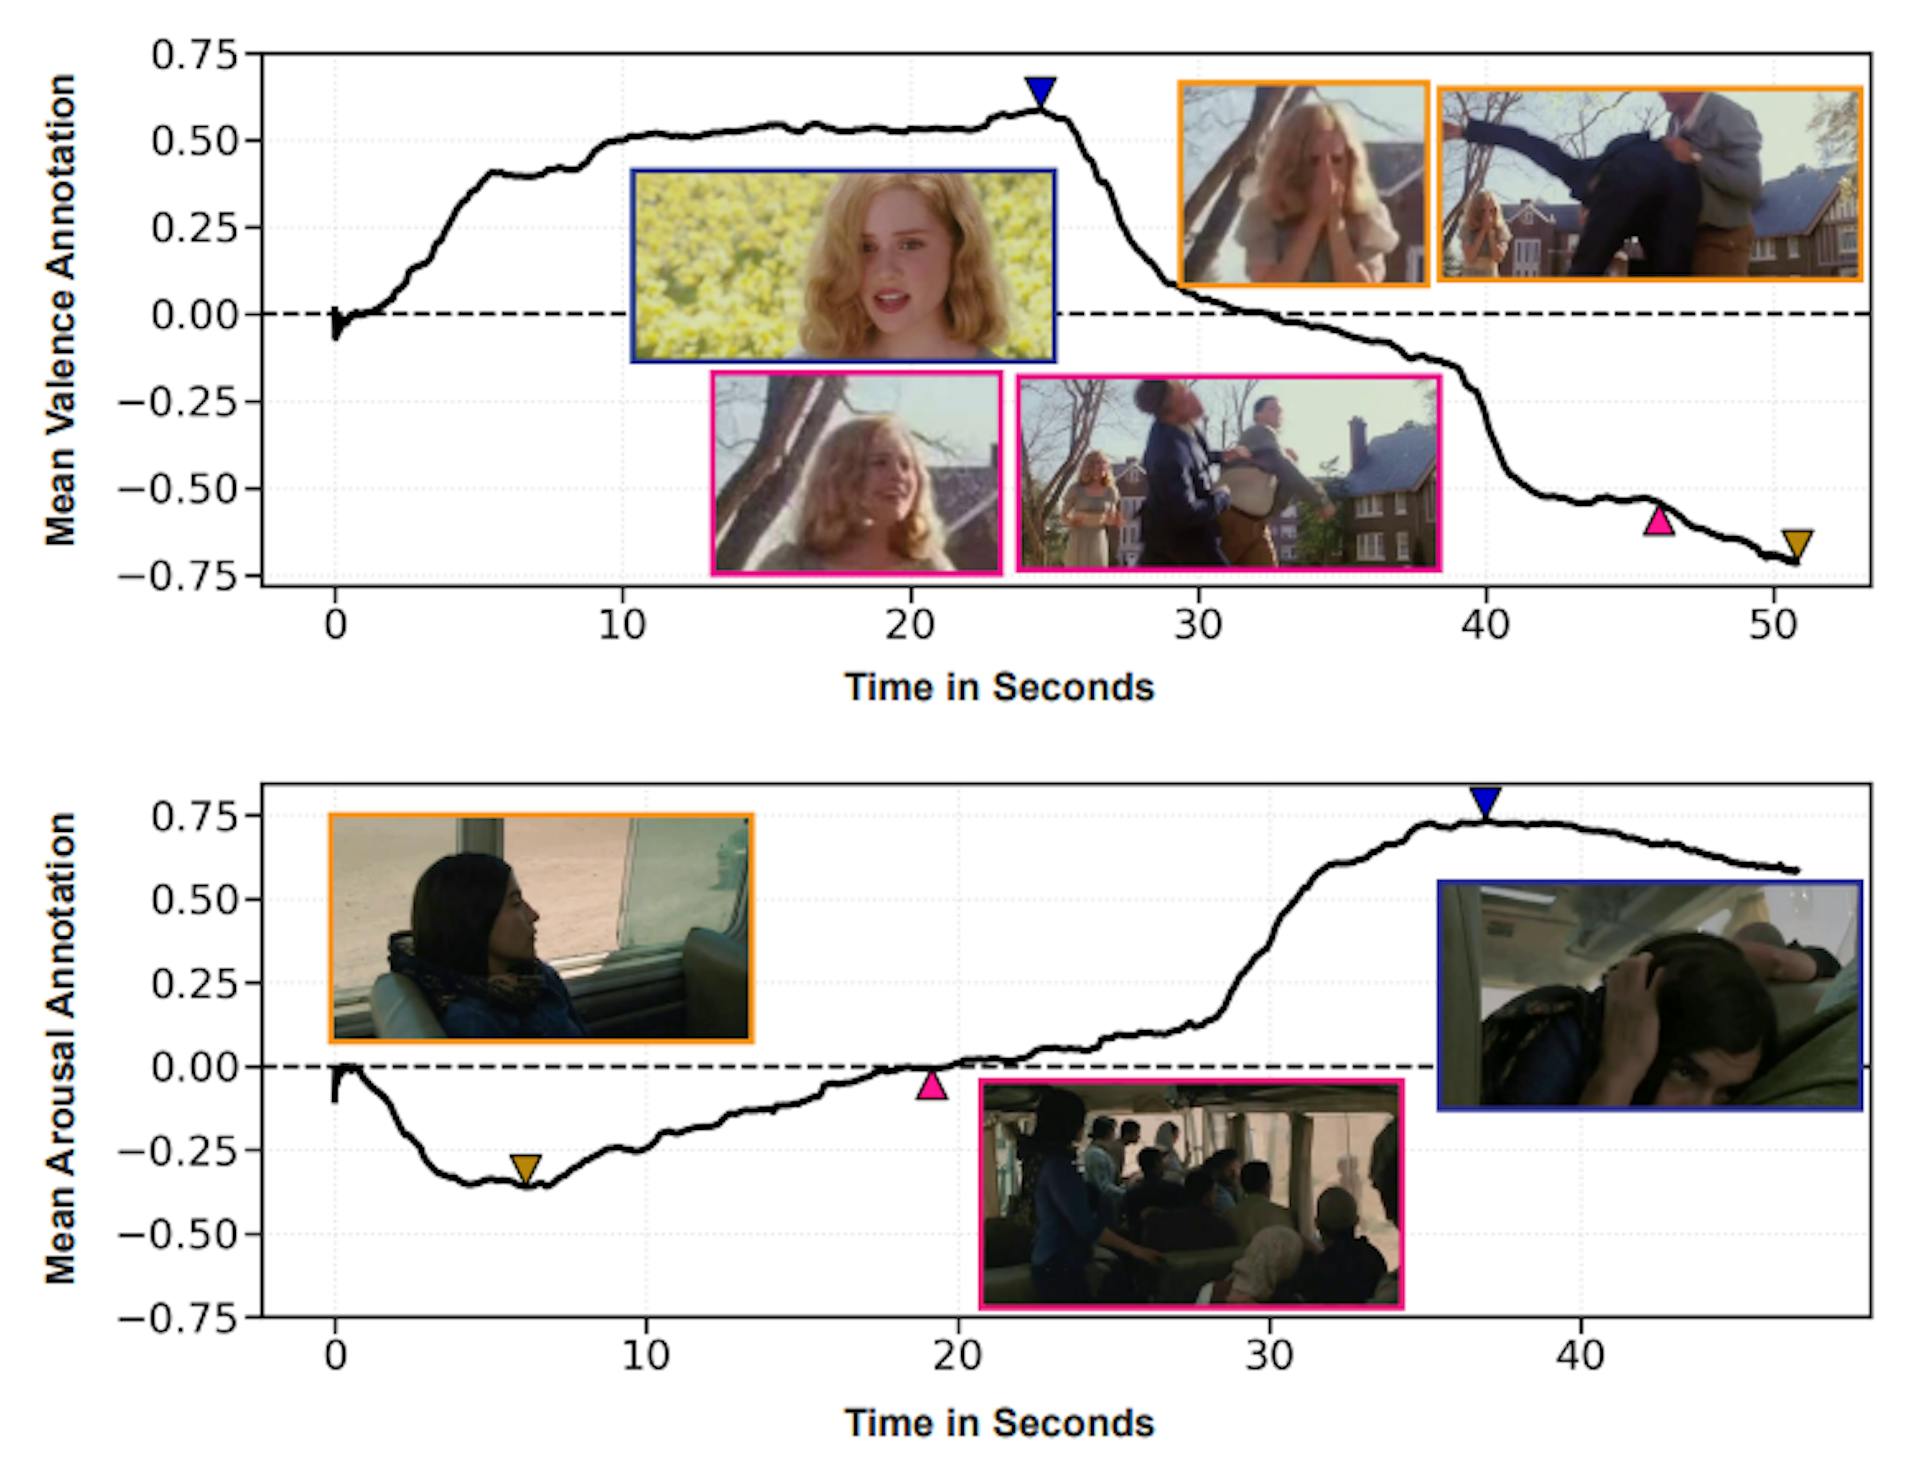 Figure 4. Visualization of sample mean ratings of valence and arousal for specific video clips with the zoom-in view of the selected character. We show key frames related to specific mean ratings of valence and arousal. Corresponding frames and ratings are marked the same color.